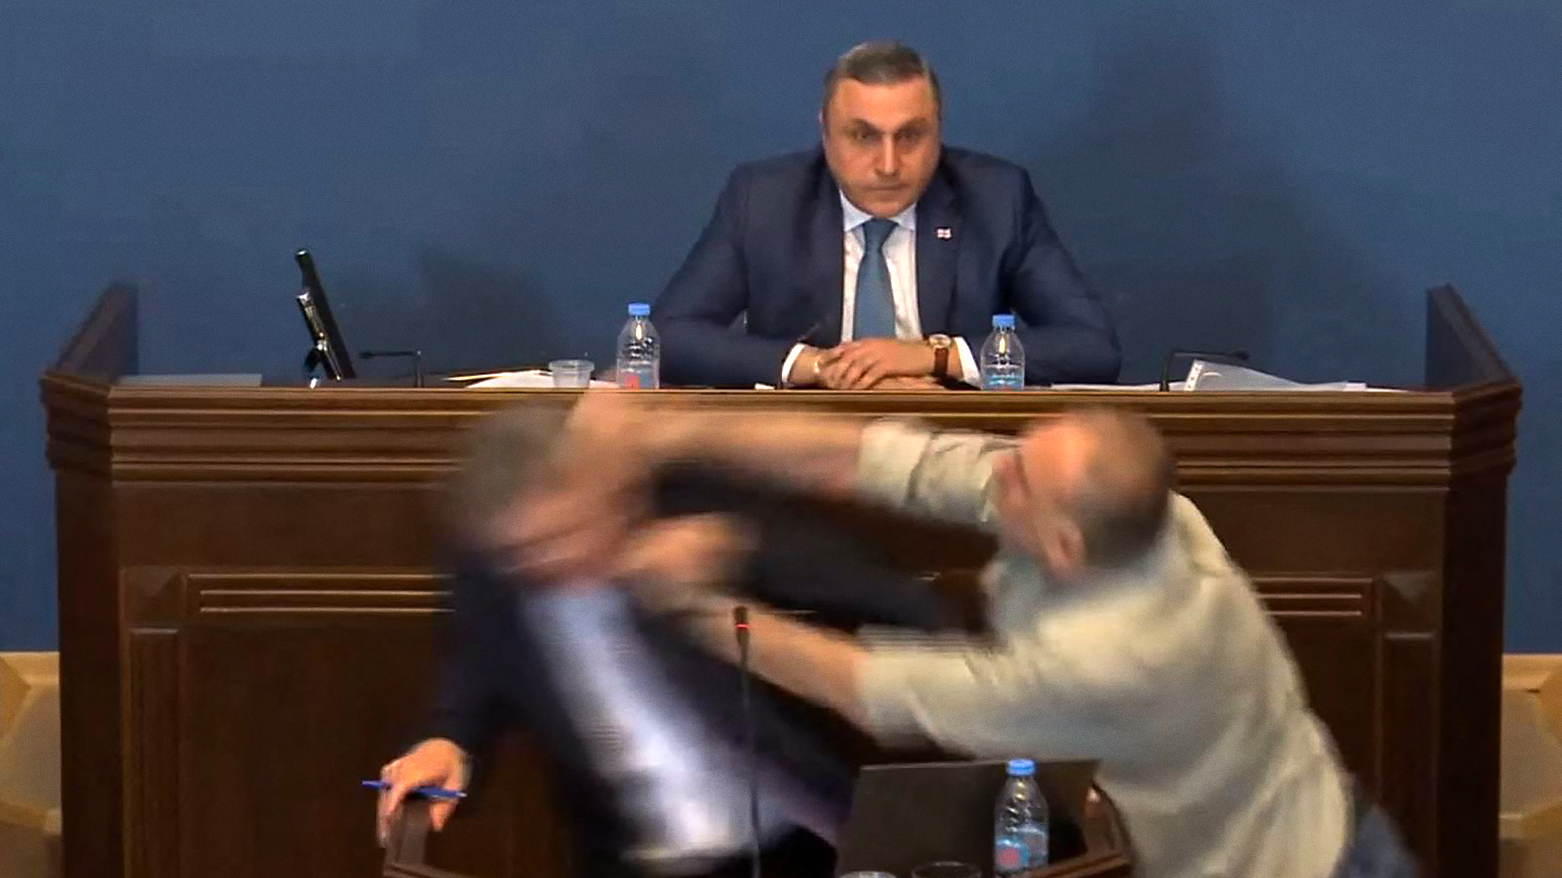 This frame grab shows members of Parliament fighting during a plenary session in Tbilisi. (Photo: AFP)